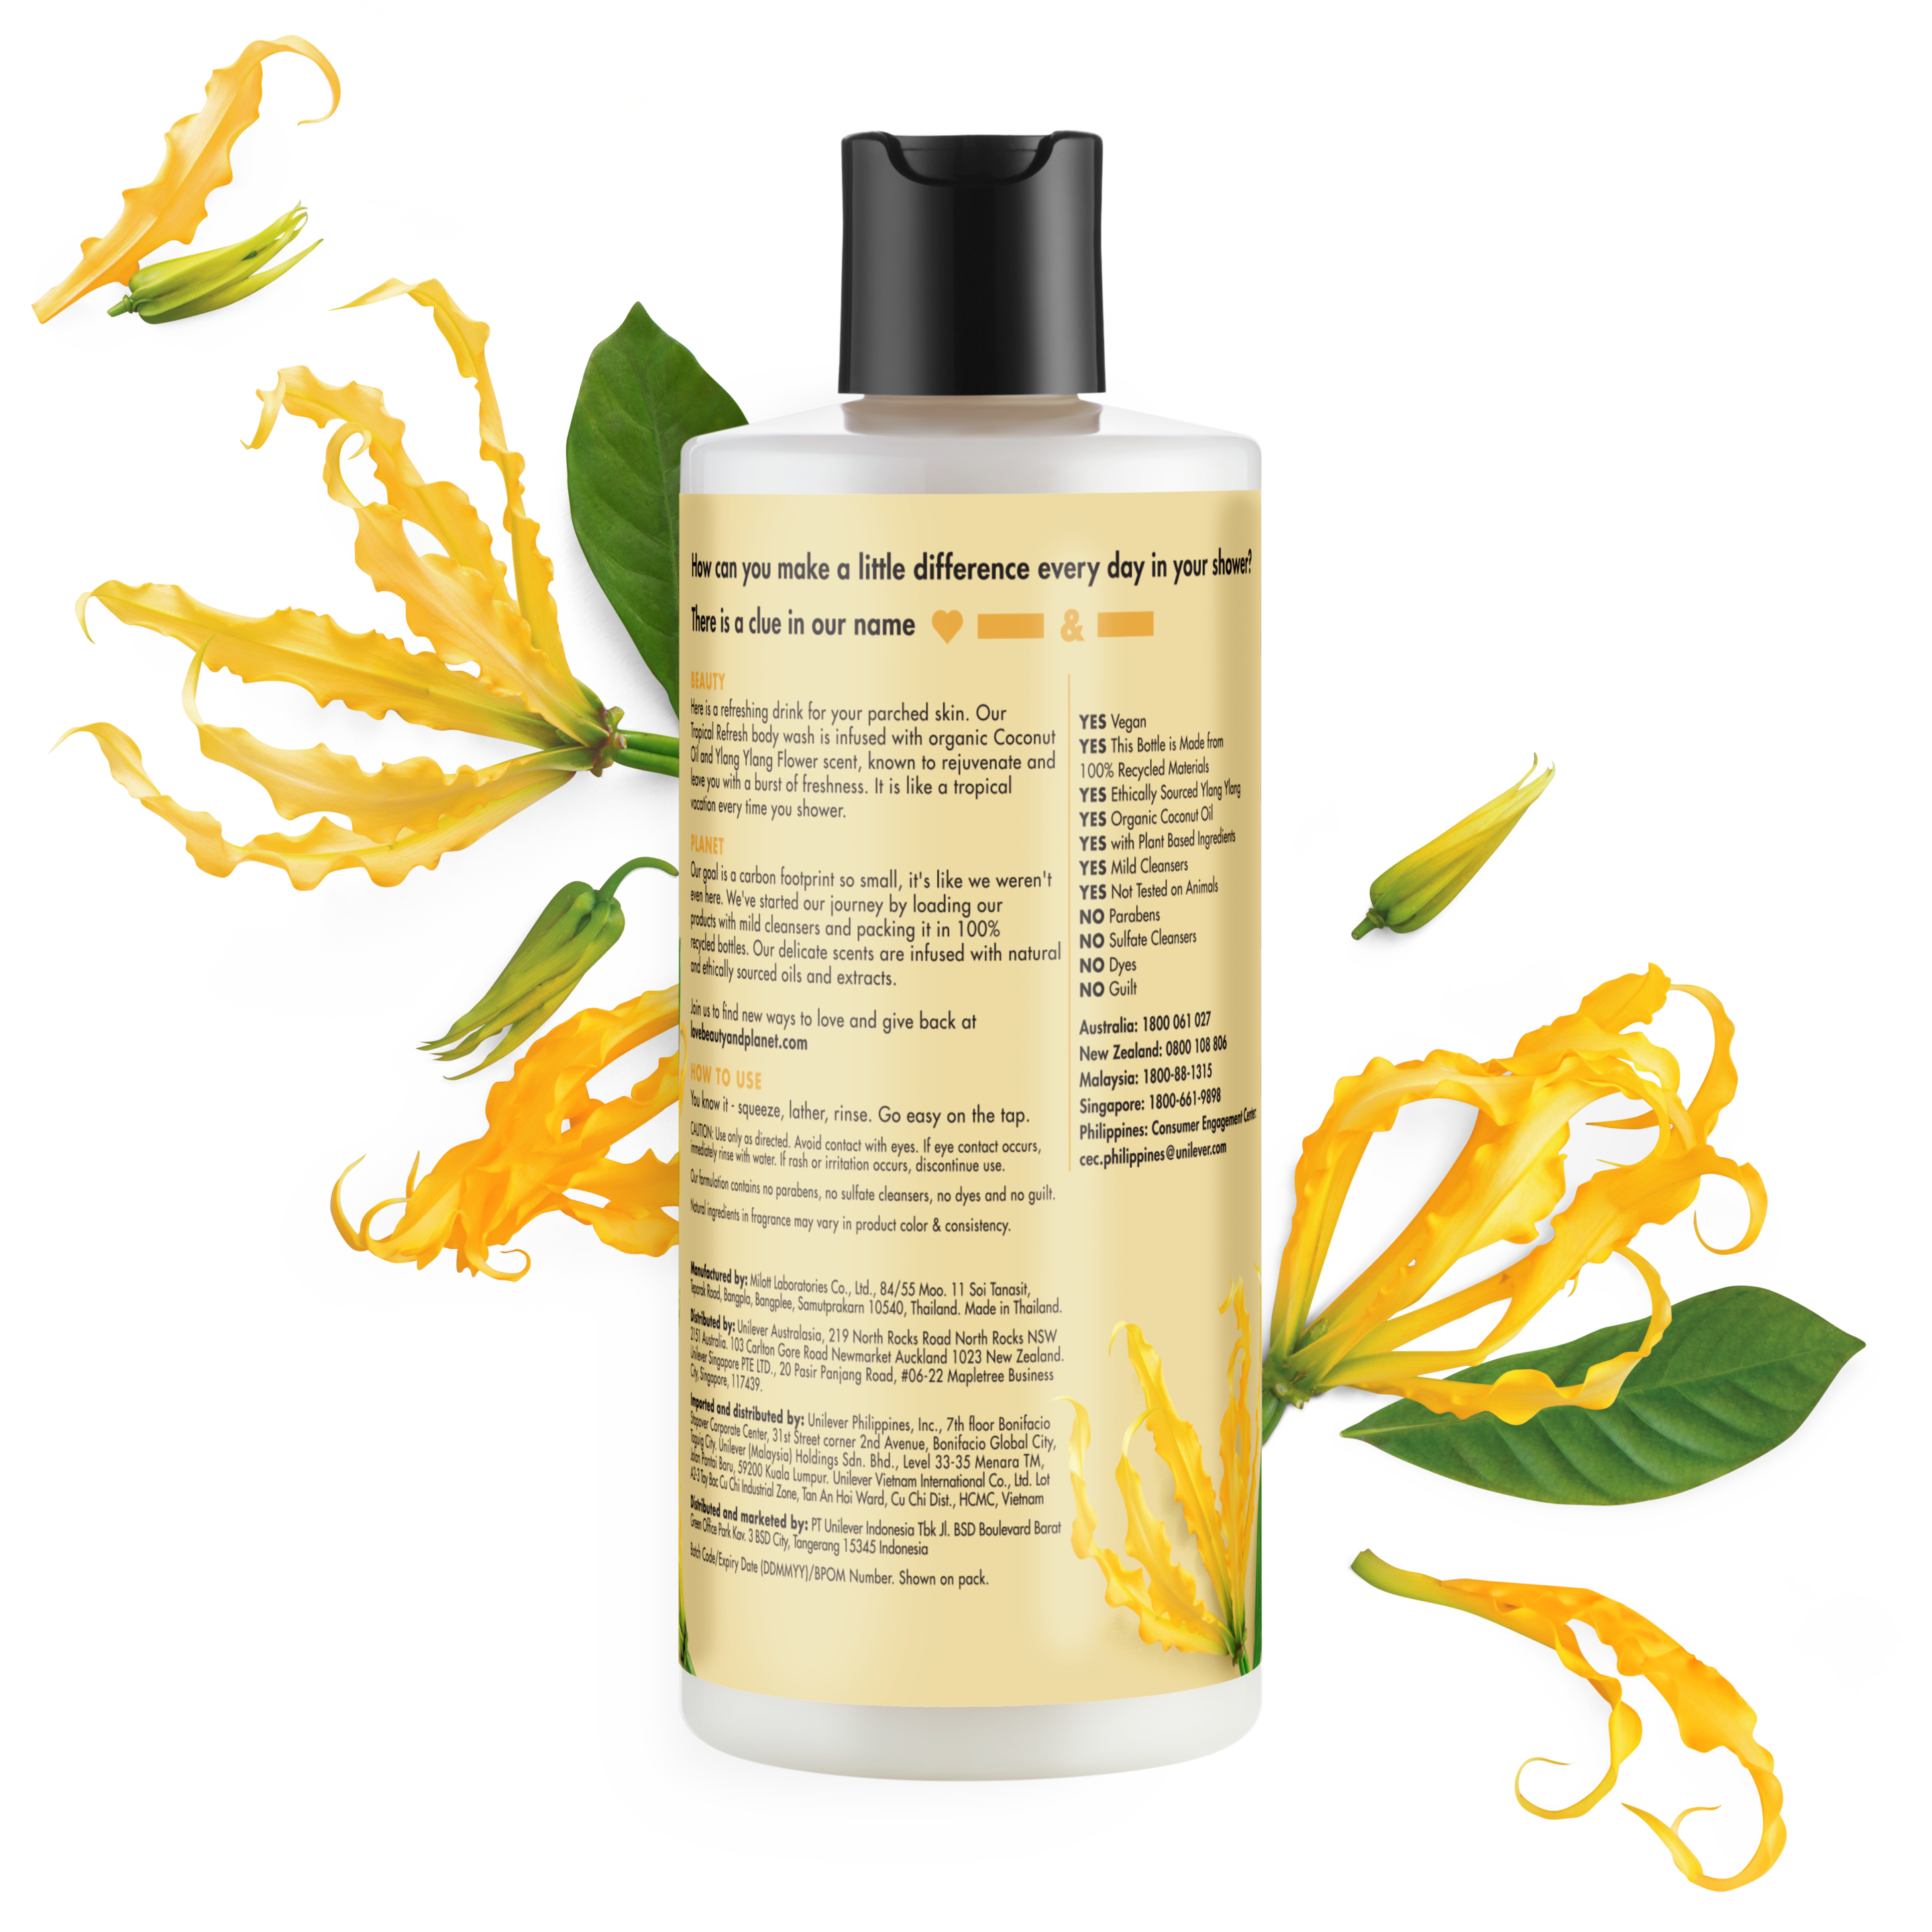 Back of body wash pack Love Beauty Planet Coconut & Ylang Ylang Body Wash Tropical Hydration 16ml